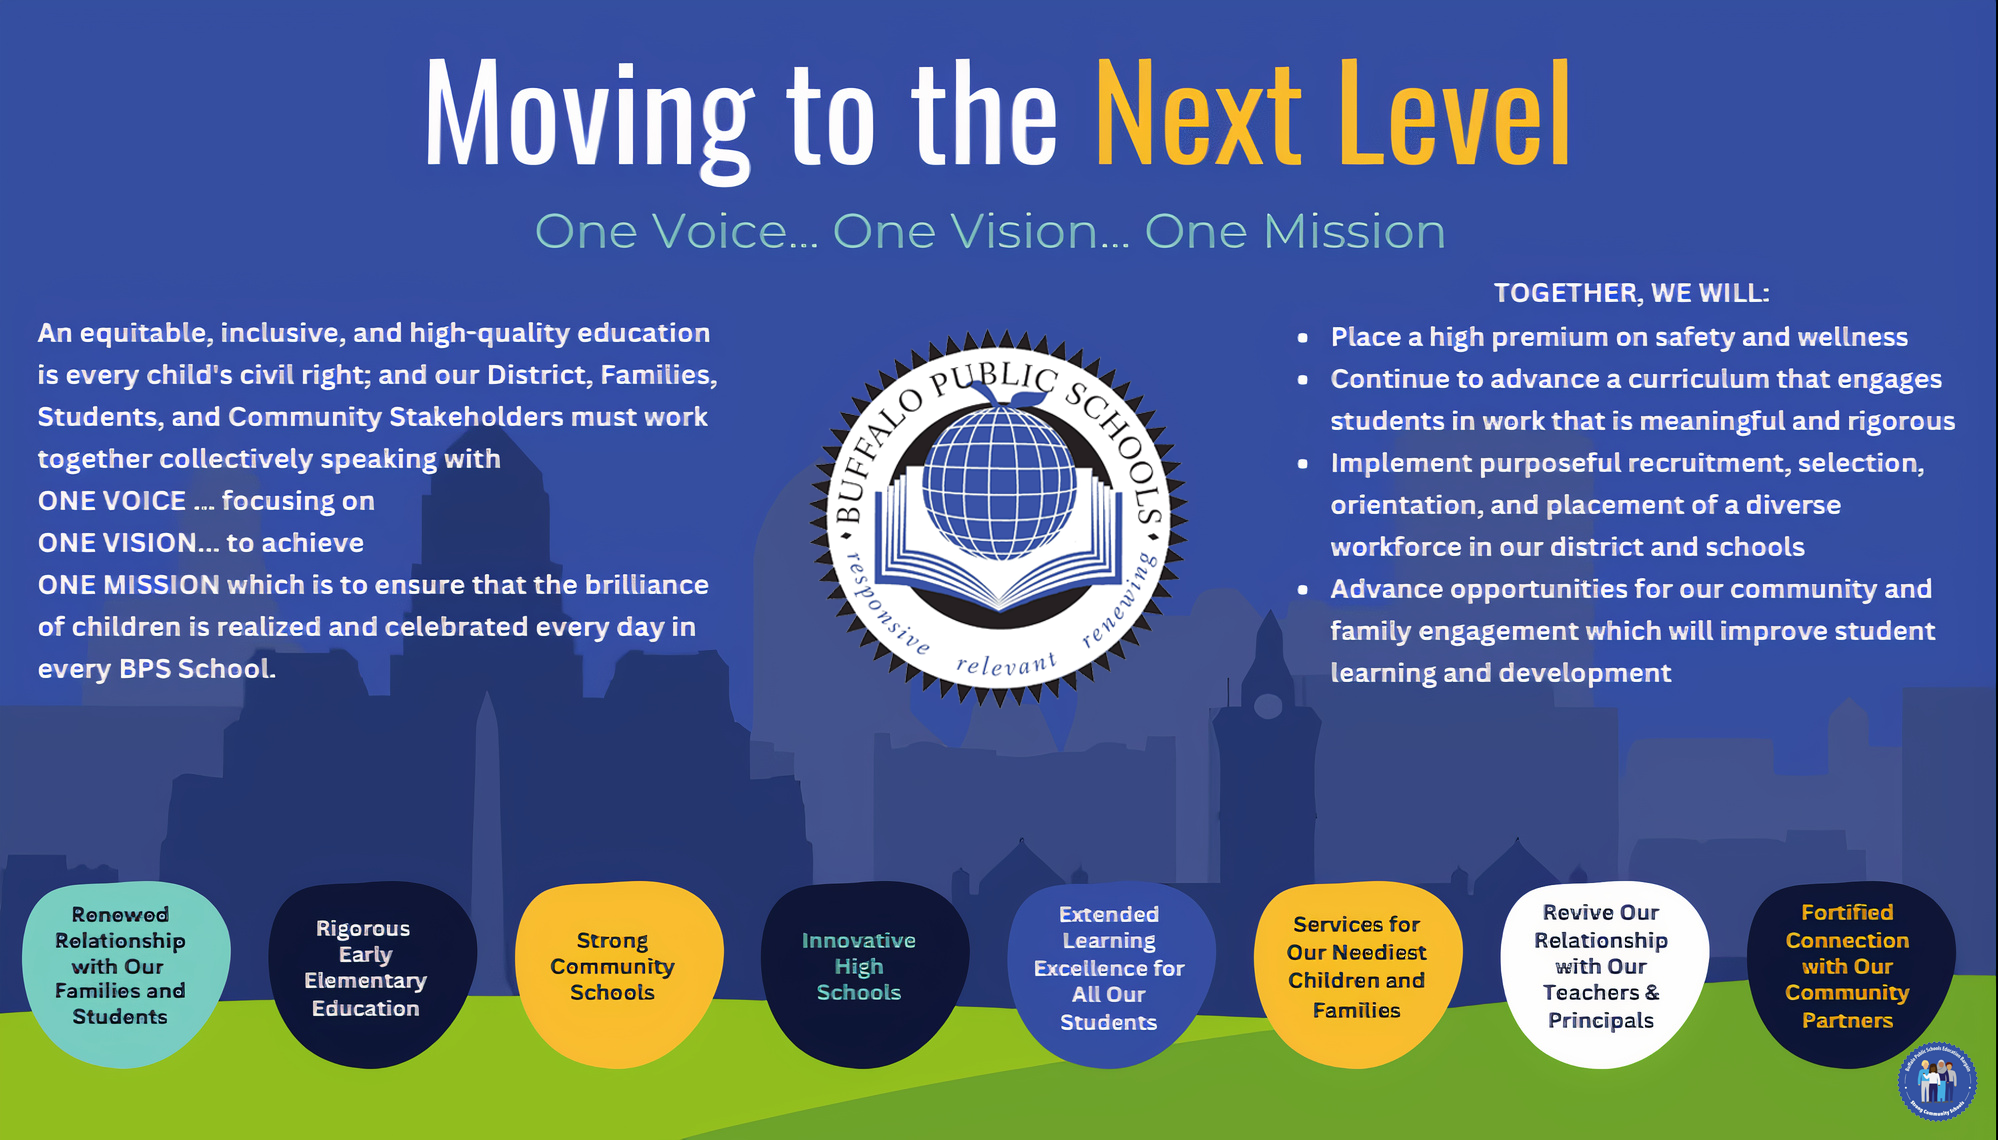 Moving to the Next Level  One Voice... One Vision... One Mission  An equitable, inclusive, and high-quality education  is every child's civil right; and our District, Families,  Students, and Community Stakeholders must work  together collectively speaking with  ONE VOICE focusing on  ONE VISION... to achieve  ONE MISSION which is to ensure that the brilliance  of children is realized and celebrated every day in  every BPS School.  •  •  •  •  TOGETHER, WE WILL:  Place a high premium on safety and wellness  Continue to advance a curriculum that engages  students in work that is meaningful and rigorous  Implement purposeful recruitment, selection,  orientation, and placement of a diverse  workforce in our district and schools  Advance opportunities for our community and  family engagement which will improve student  learning and development  Strong  Community  Schools  relevant  Extended  Learning  Excellence for  AU Our  Students  c  Renewed  Relationship  with Our  Families and  Students  Rigorous  Early  Elementary  Education  Innovative  High  Schools  Services for  Our Neediest  Children and  Families  Revive Our  Relationship  with Our  Teachers &  Principals  Fortified  Connection  with Our  Community  Partners 